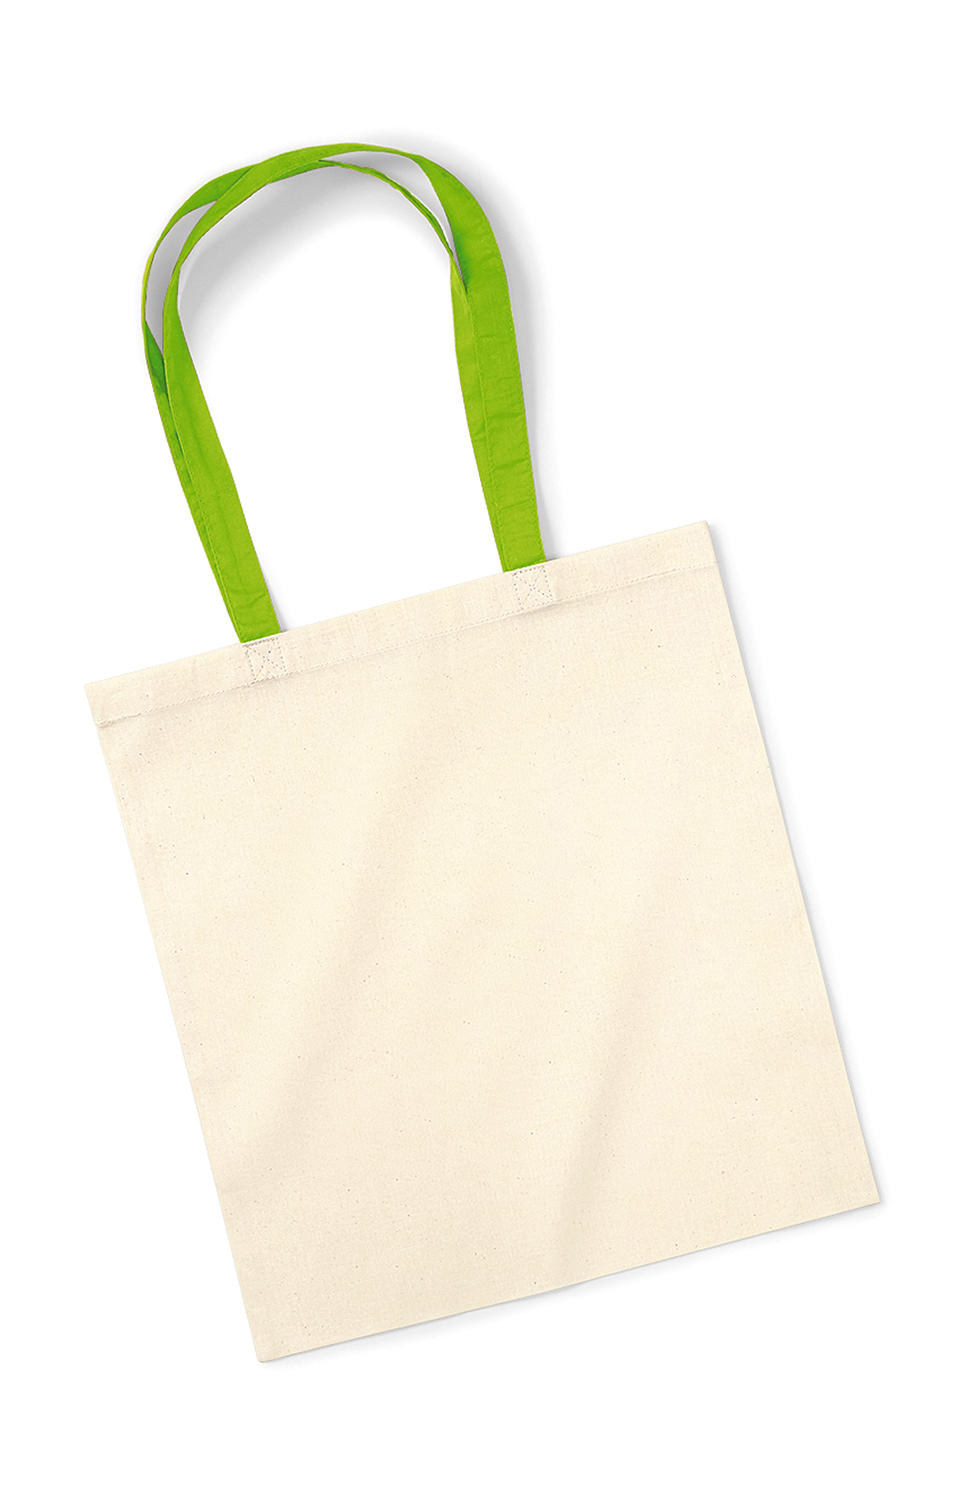  Bag for Life - Contrast Handles in Farbe Natural/Lime Green